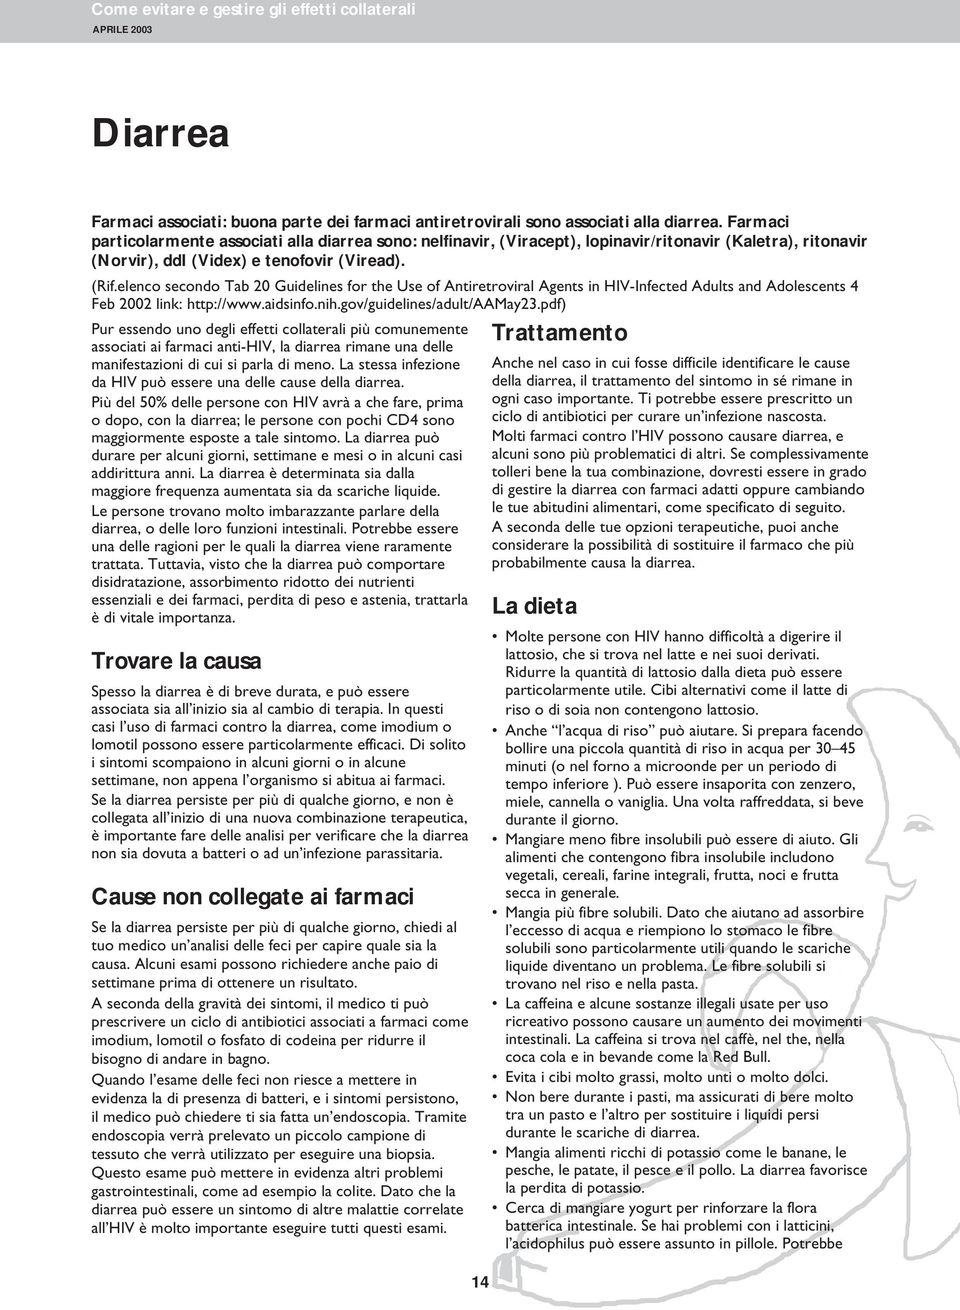 elenco secondo Tab 20 Guidelines for the Use of Antiretroviral Agents in HIV-Infected Adults and Adolescents 4 Feb 2002 link: http://www.aidsinfo.nih.gov/guidelines/adult/aamay23.